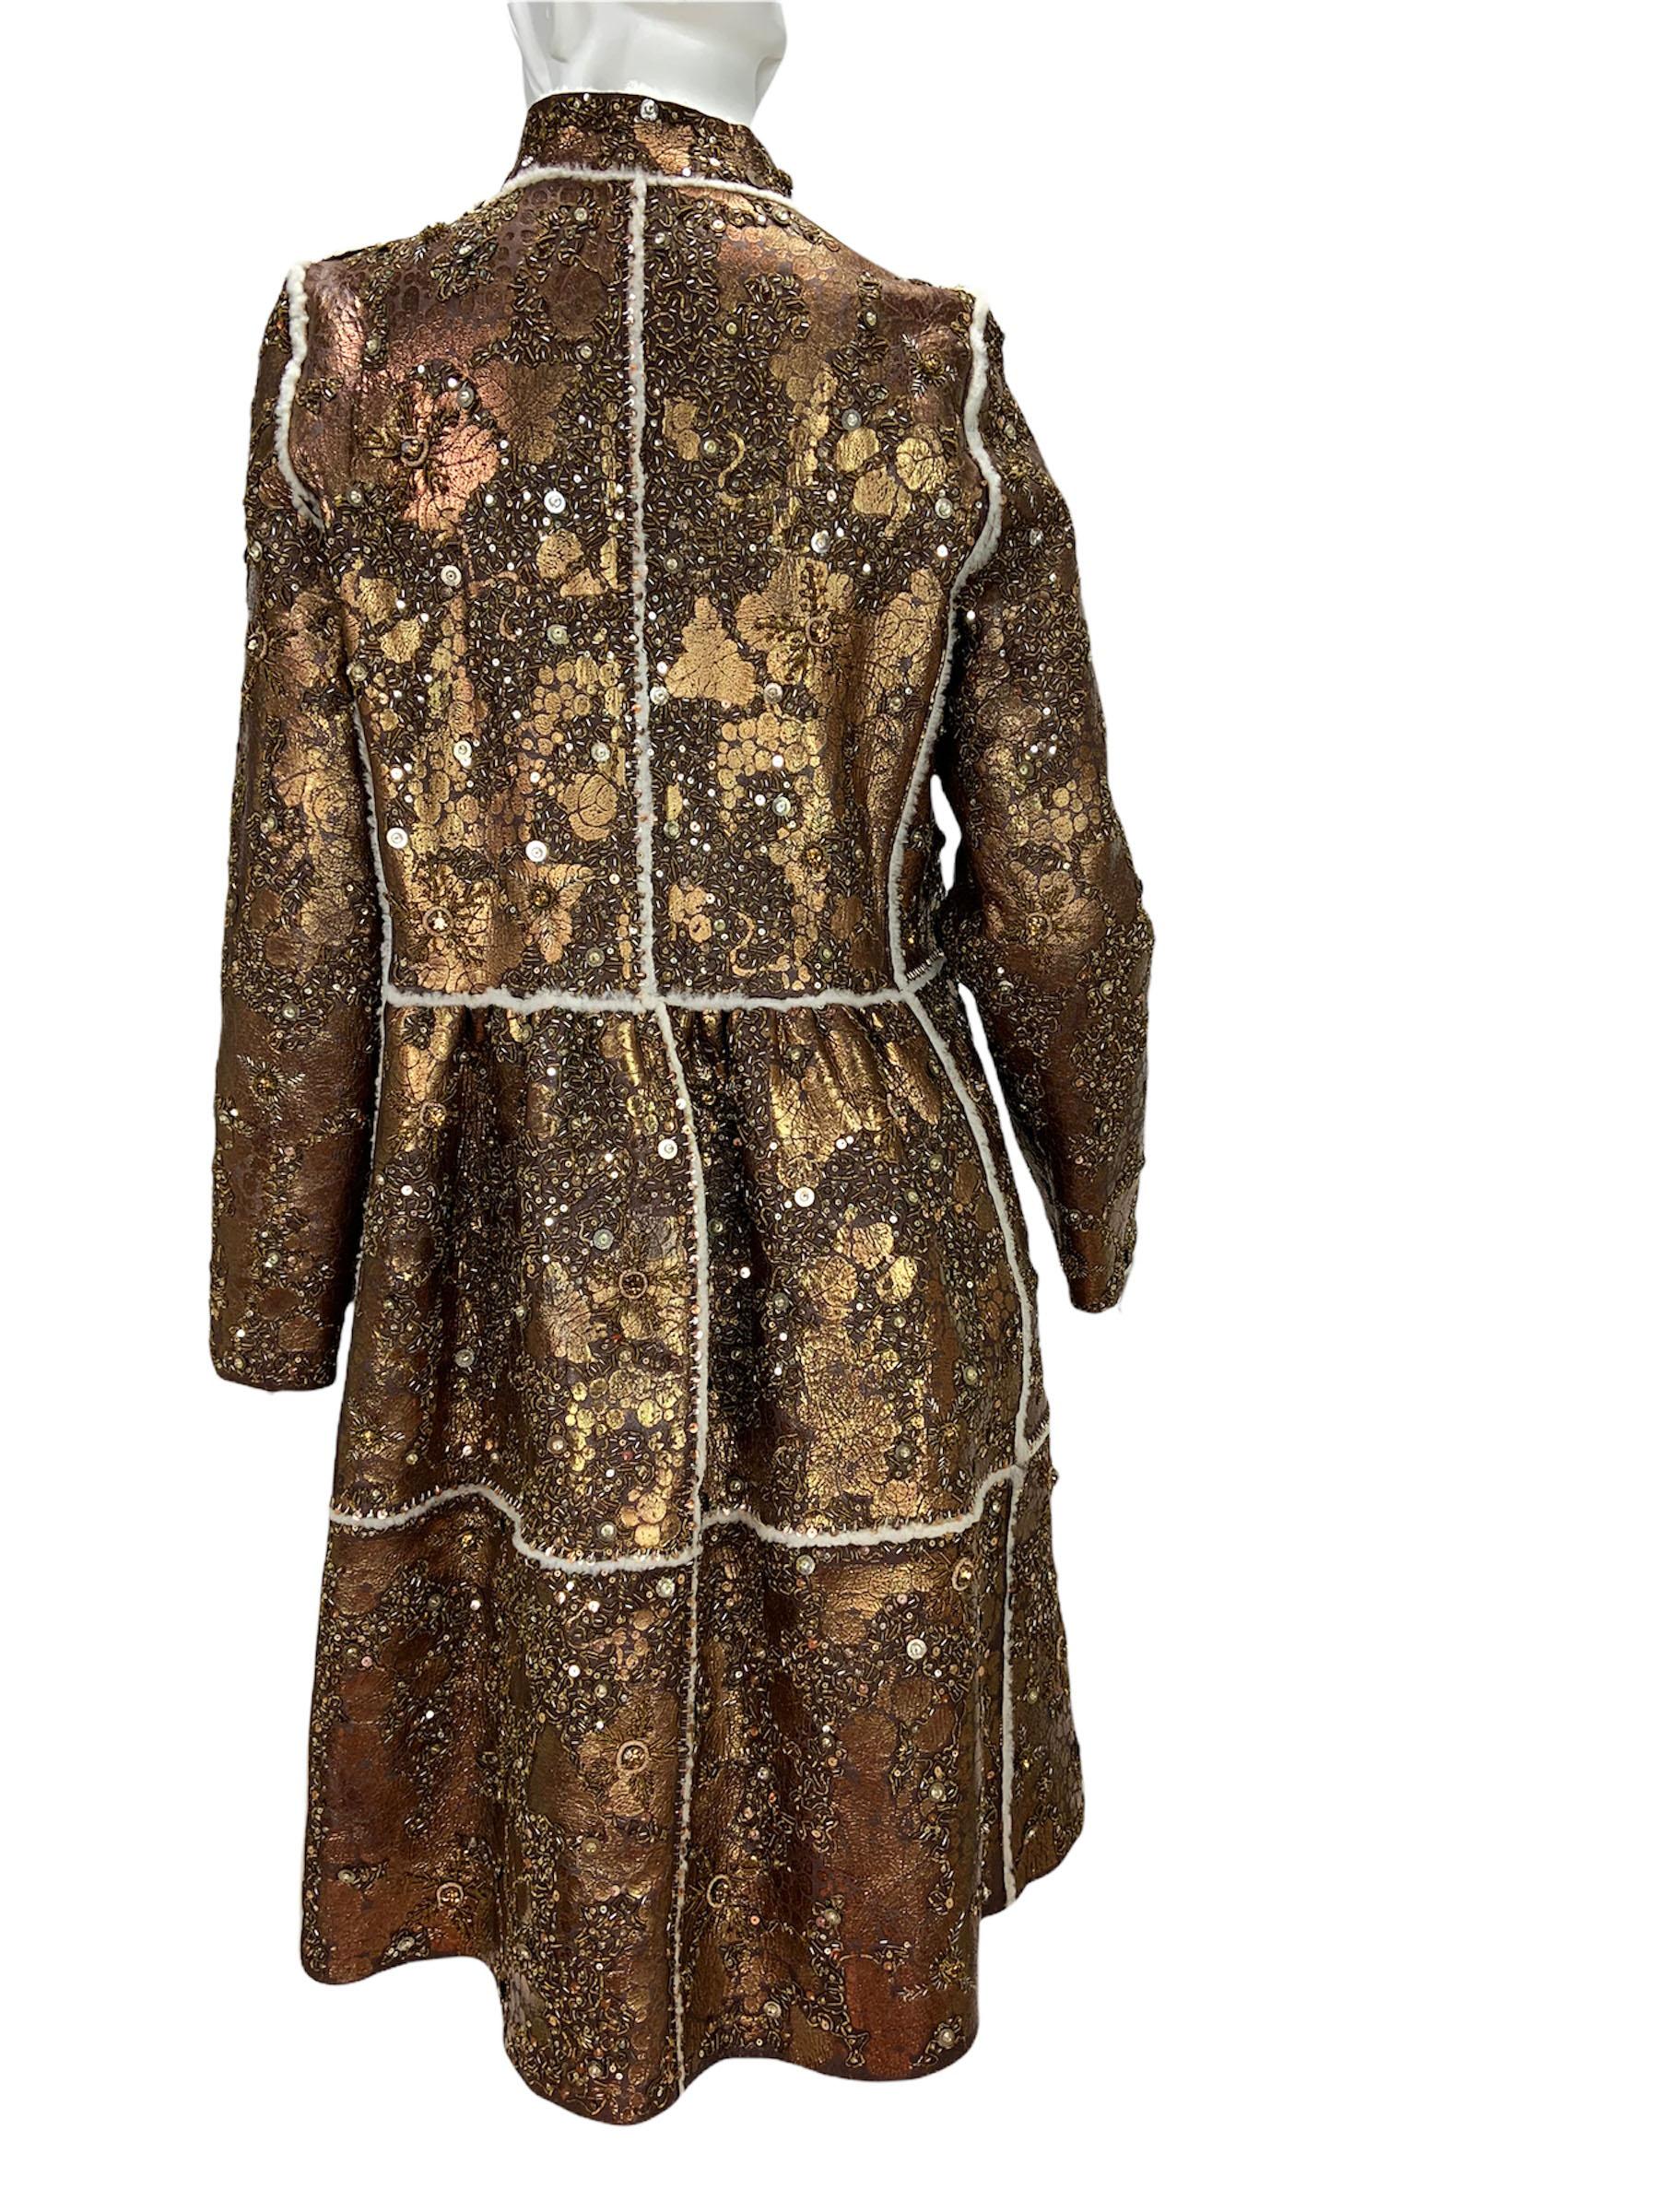 Oscar De La Renta Runway F/W 2008 Shearling Fully Embellished Coat size 6 and 10 In New Condition For Sale In Montgomery, TX